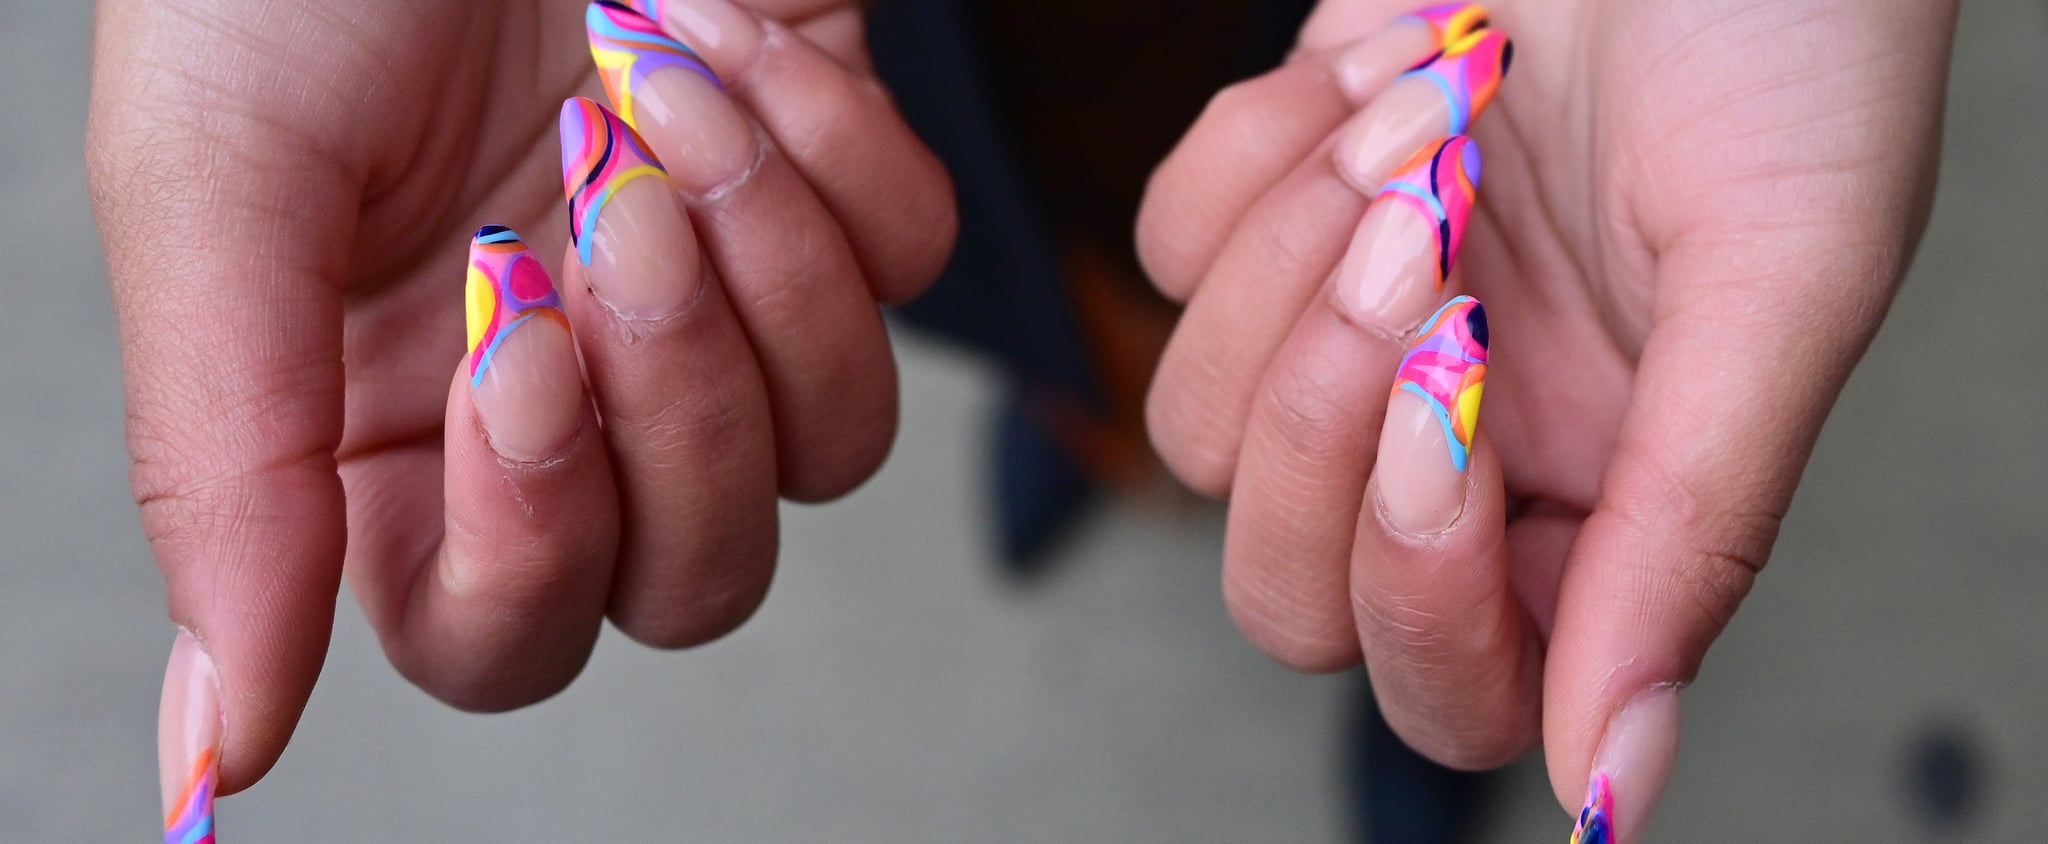 Almond-Shaped Nails: Design Ideas From Manicurists